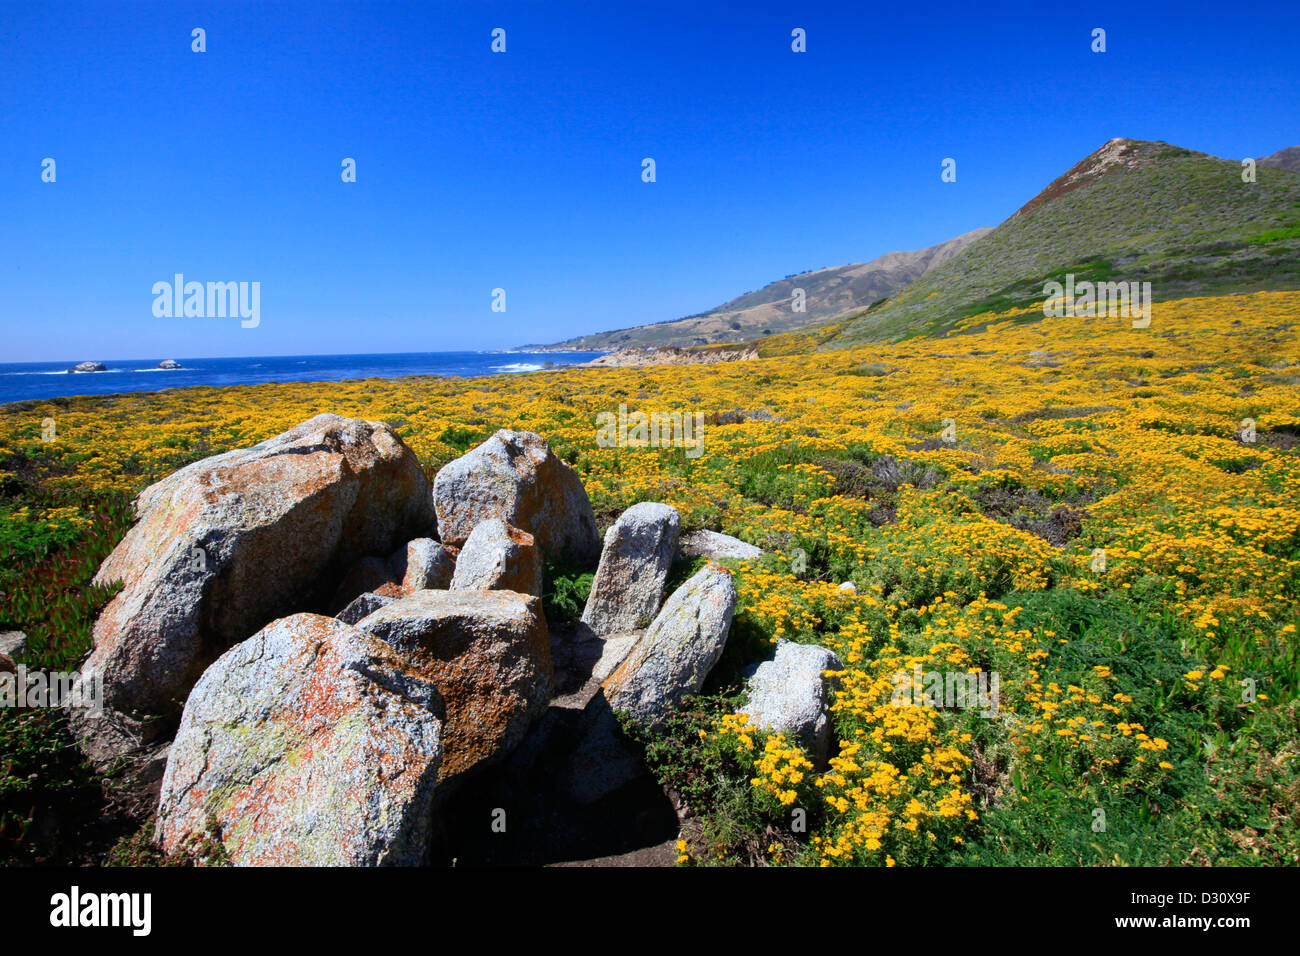 Wildflowers blooming at Soberanes Point along the coast of Big Sur, California. Stock Photo